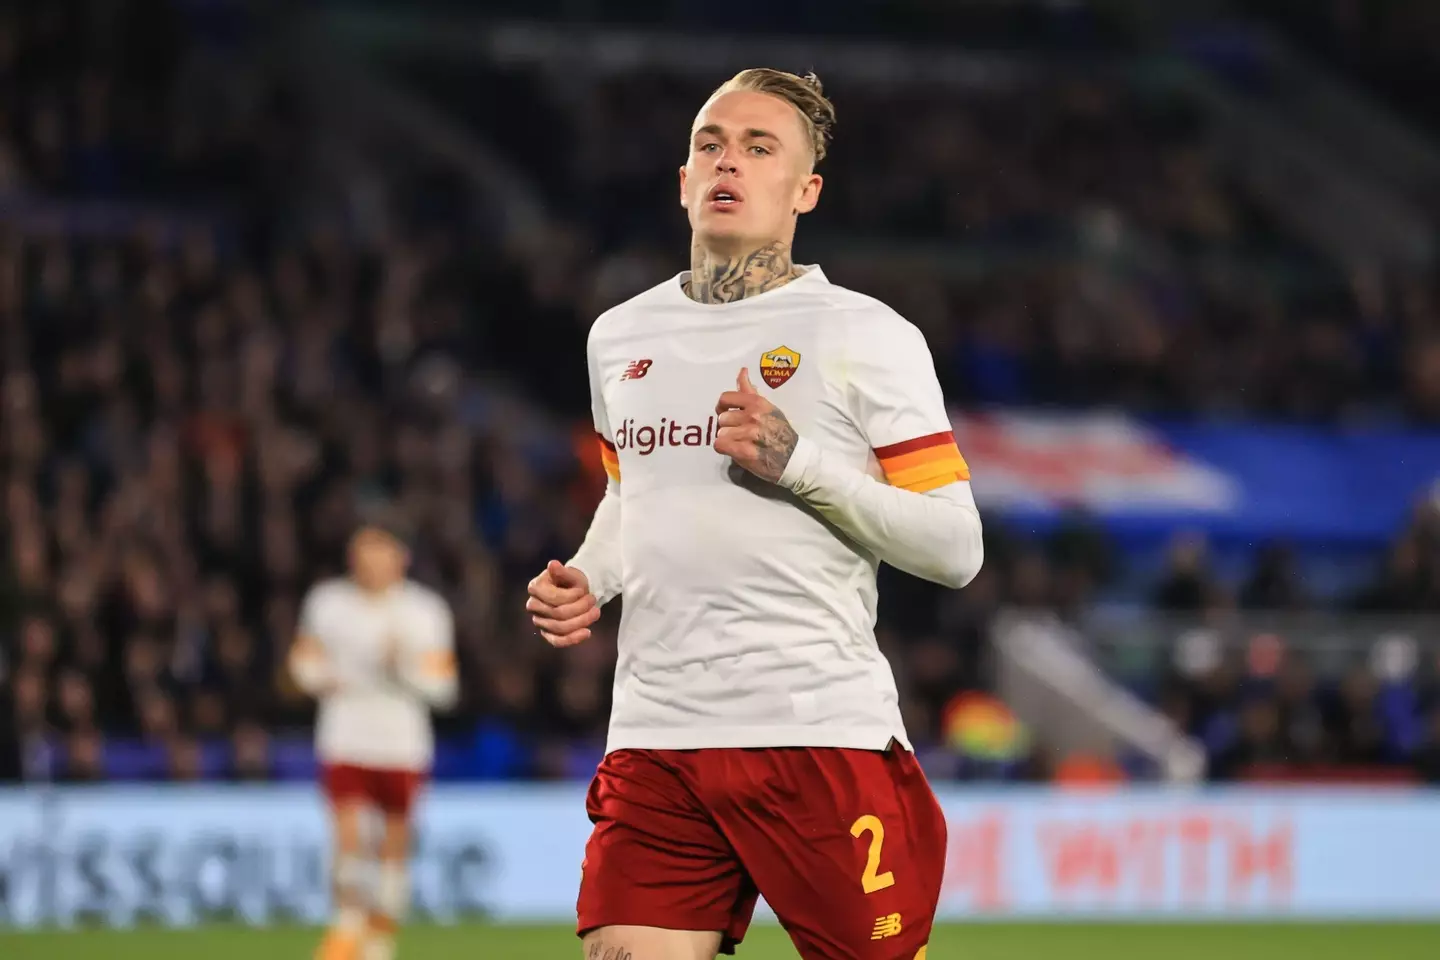 Rick Karsdorp is believed to be the player who “betrayed” his Roma teammates, according to Jose Mourinho.